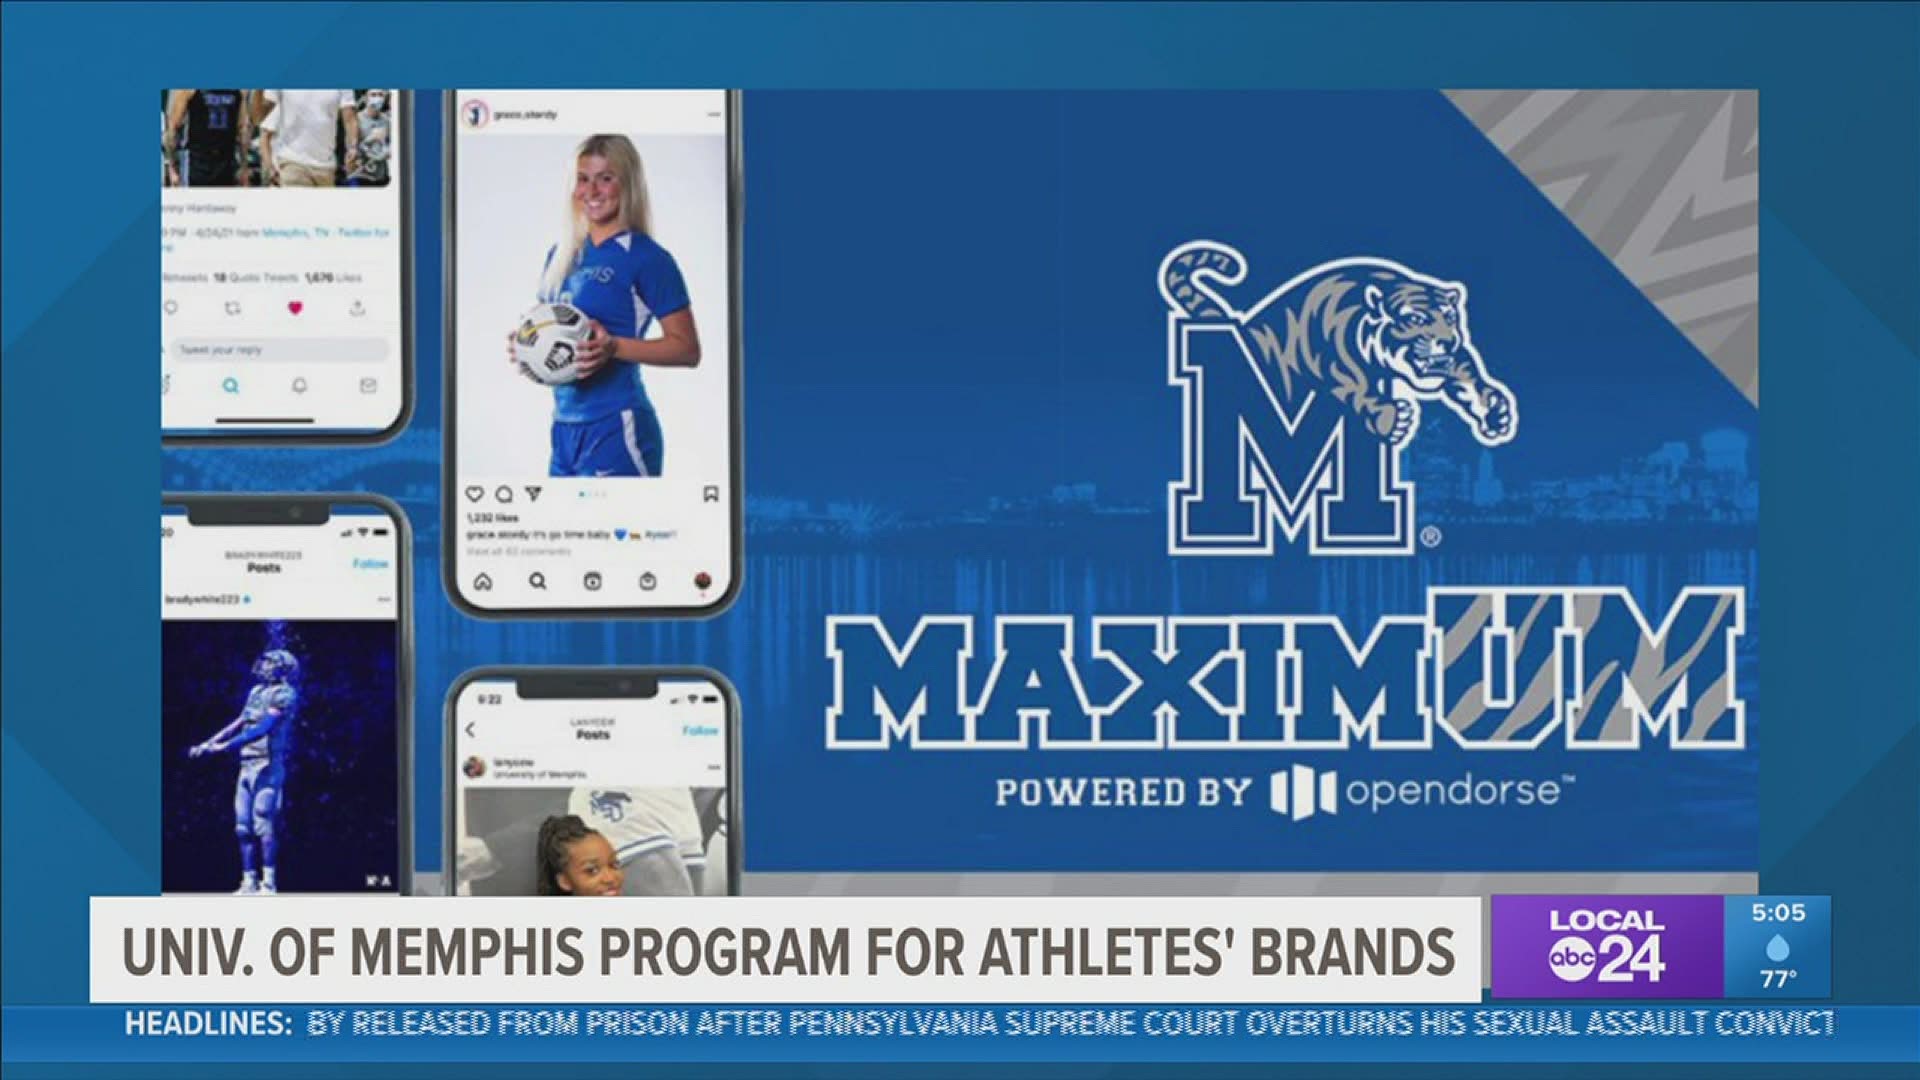 The program will provide student-athletes with education and resources to get the “maximum” out of their brands in the Name, Image and Likeness (NIL) era.